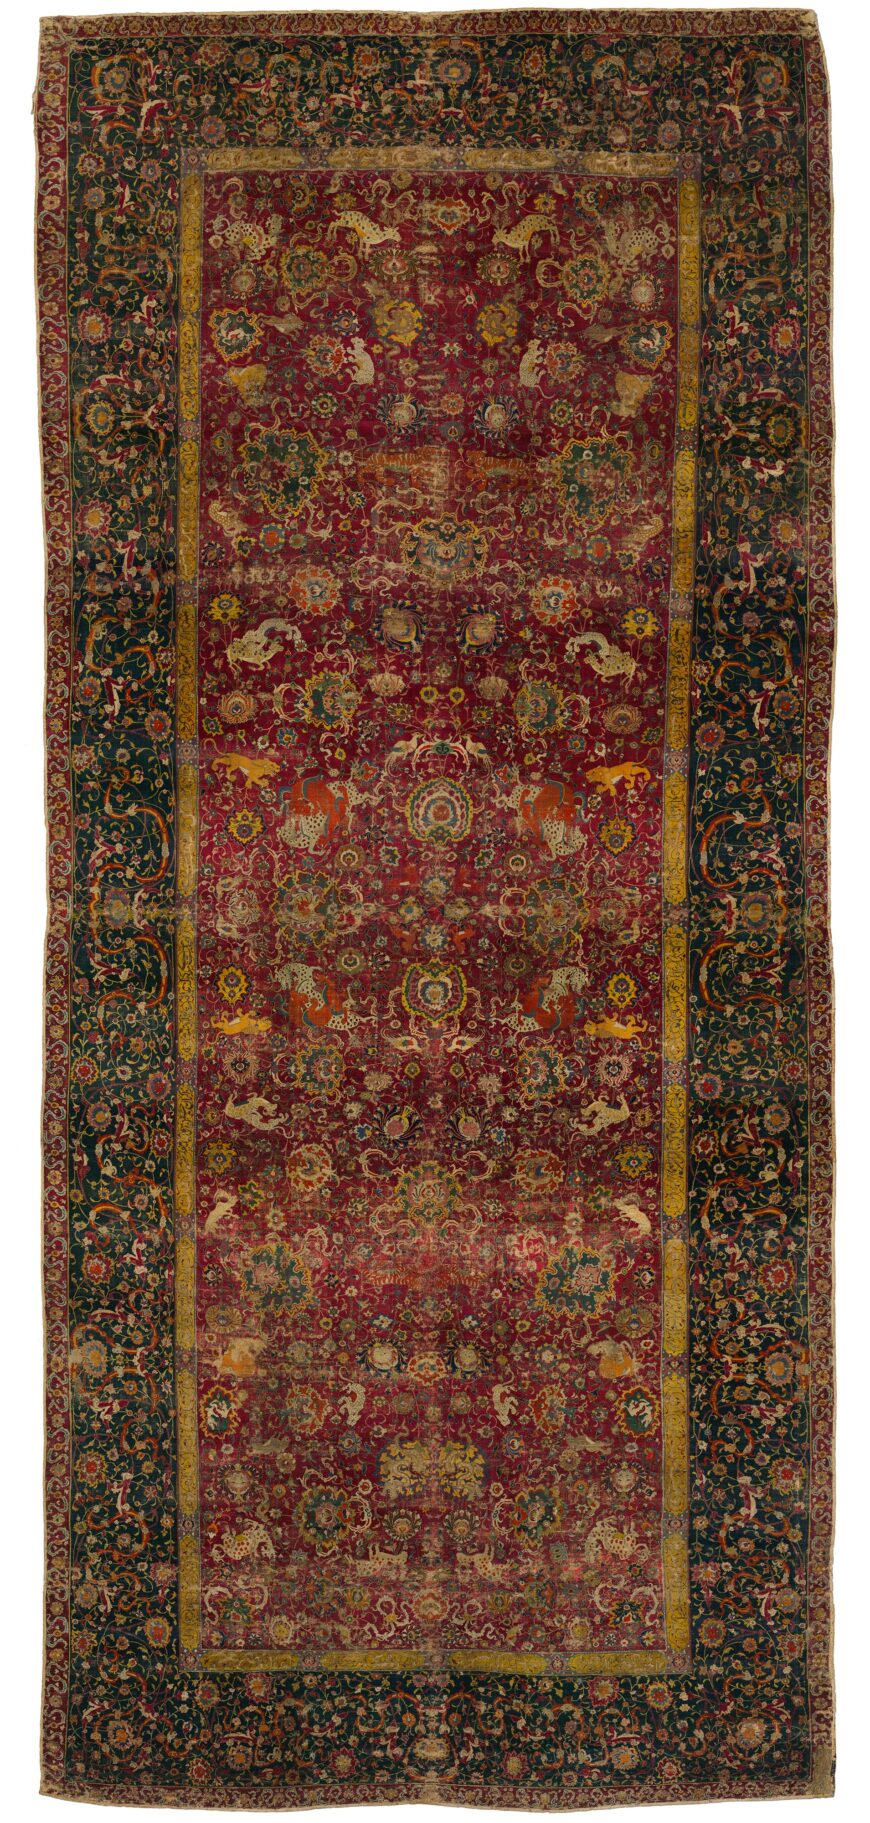 Safavid carpet with similar hunting scenes. The Emperor's Carpet, second half 16th century (attributed to Iran), Safavid empire, silk and wool, 759.5 x 339.1 cm (The Metropolitan Museum of Art, New York)